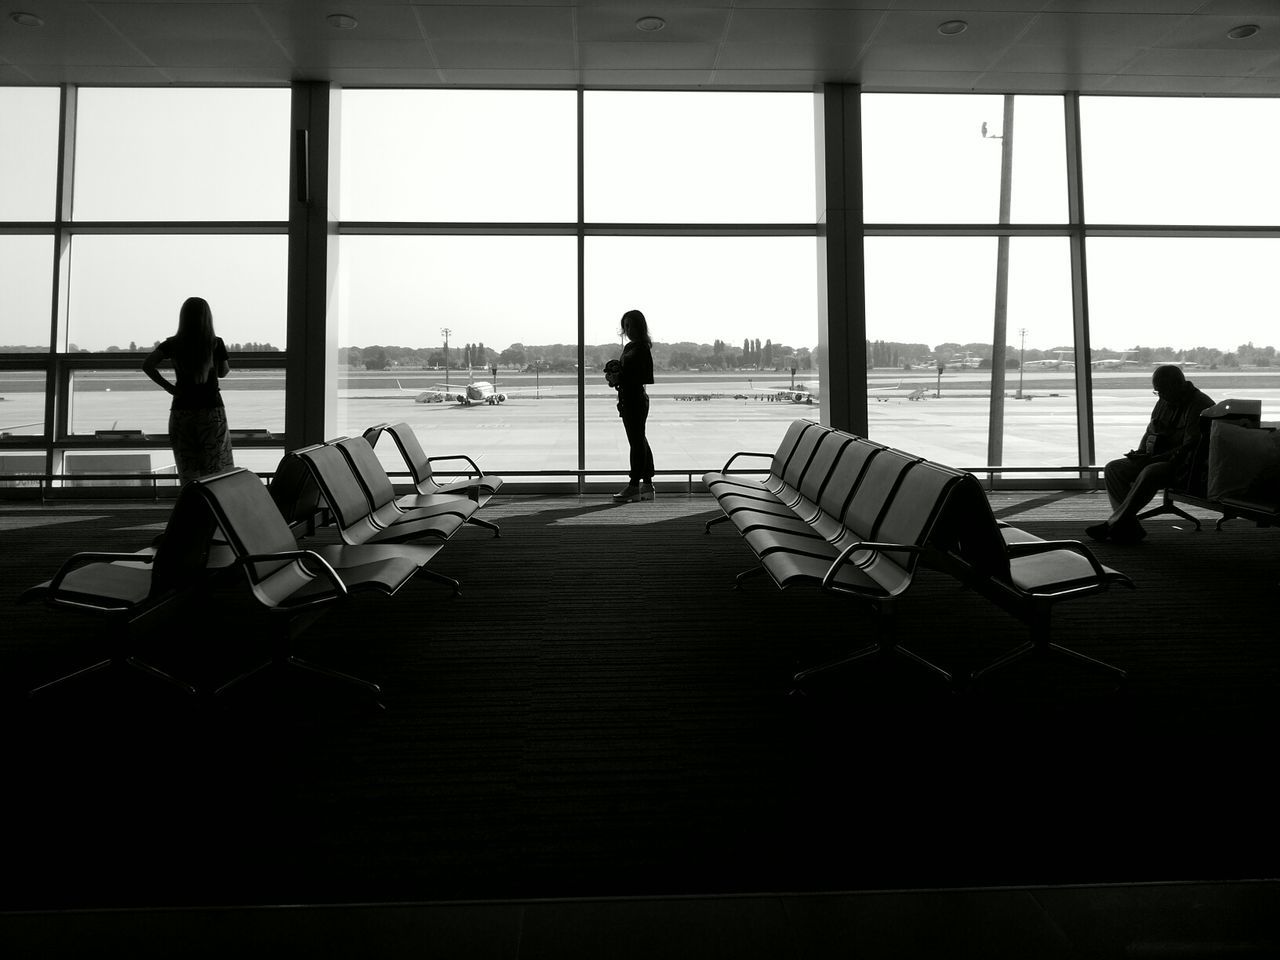 Silhouette people against window at airport